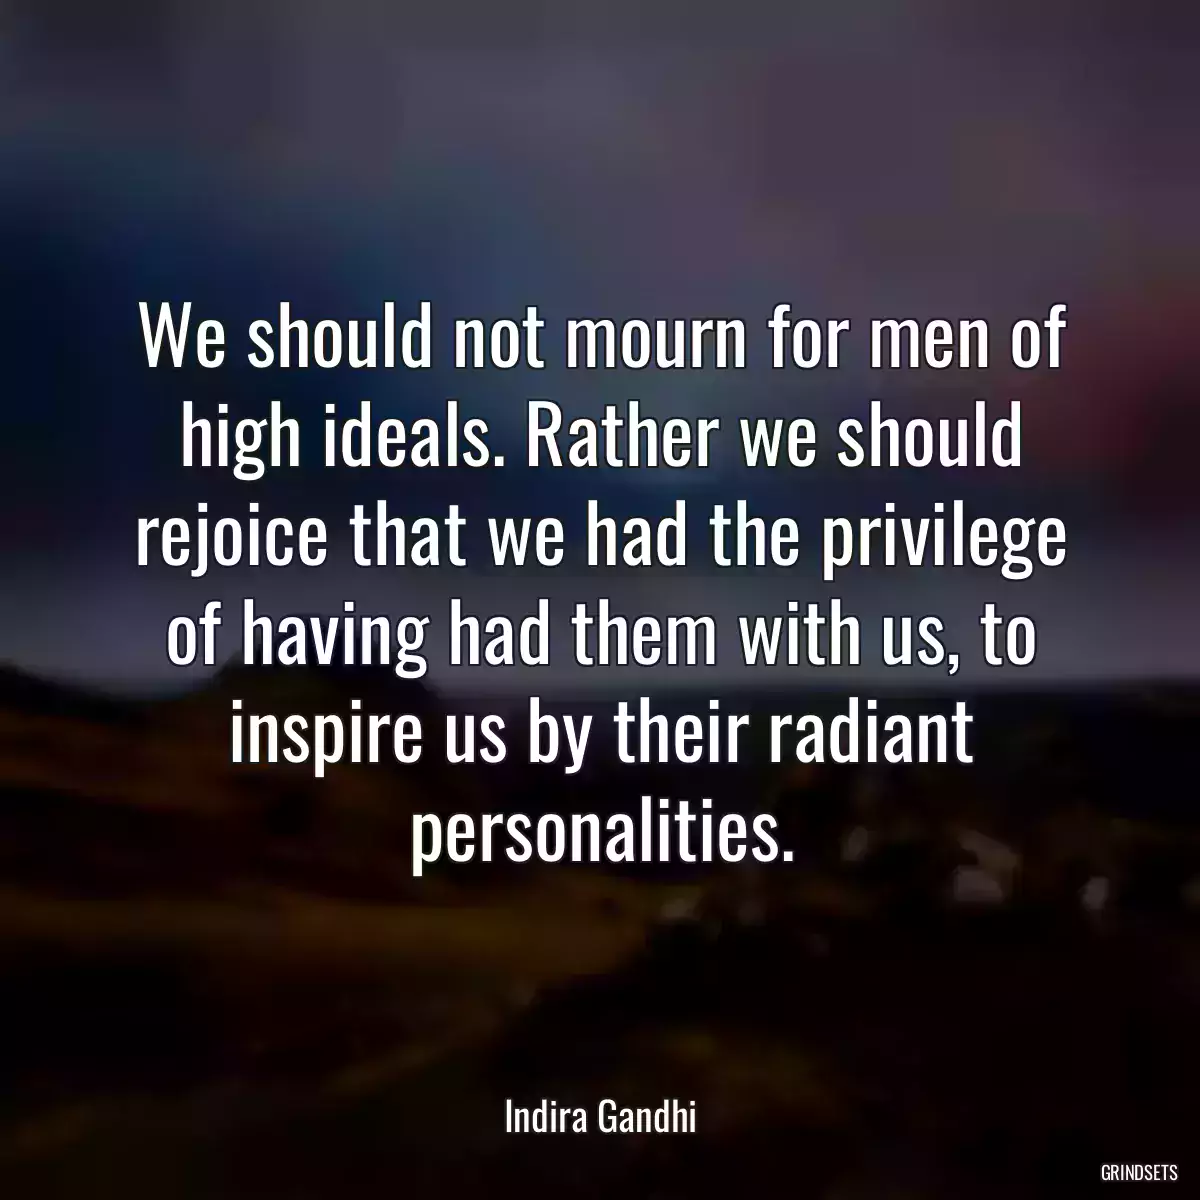 We should not mourn for men of high ideals. Rather we should rejoice that we had the privilege of having had them with us, to inspire us by their radiant personalities.